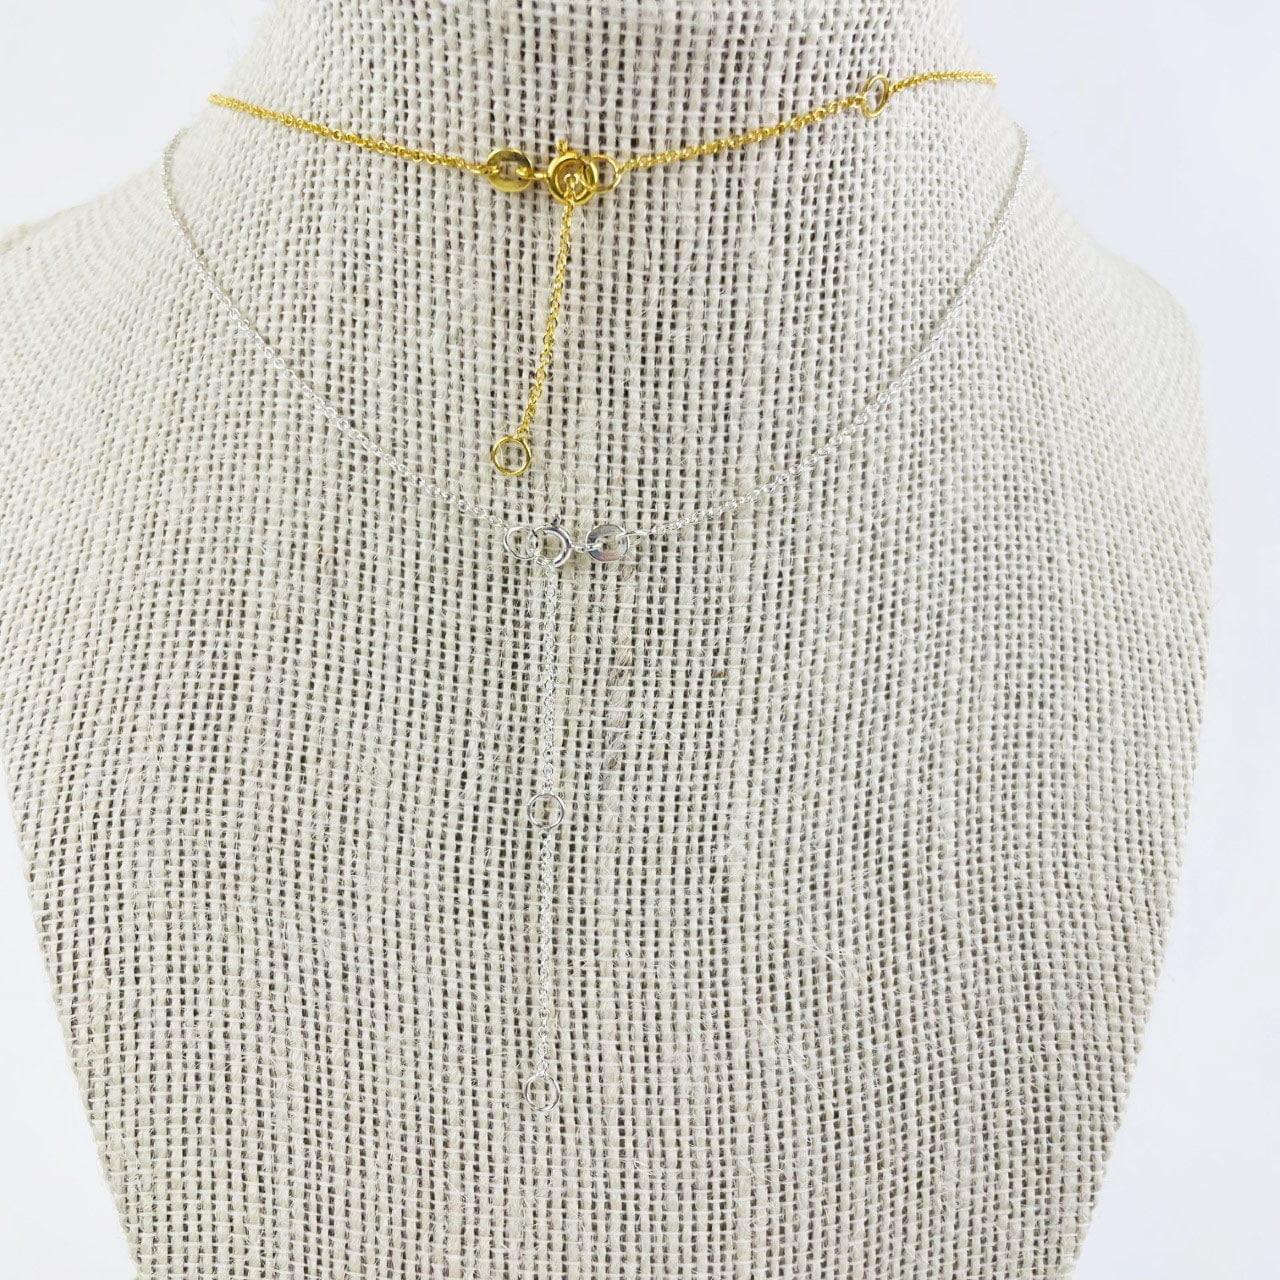 gold and silver necklace showing clasps in the back